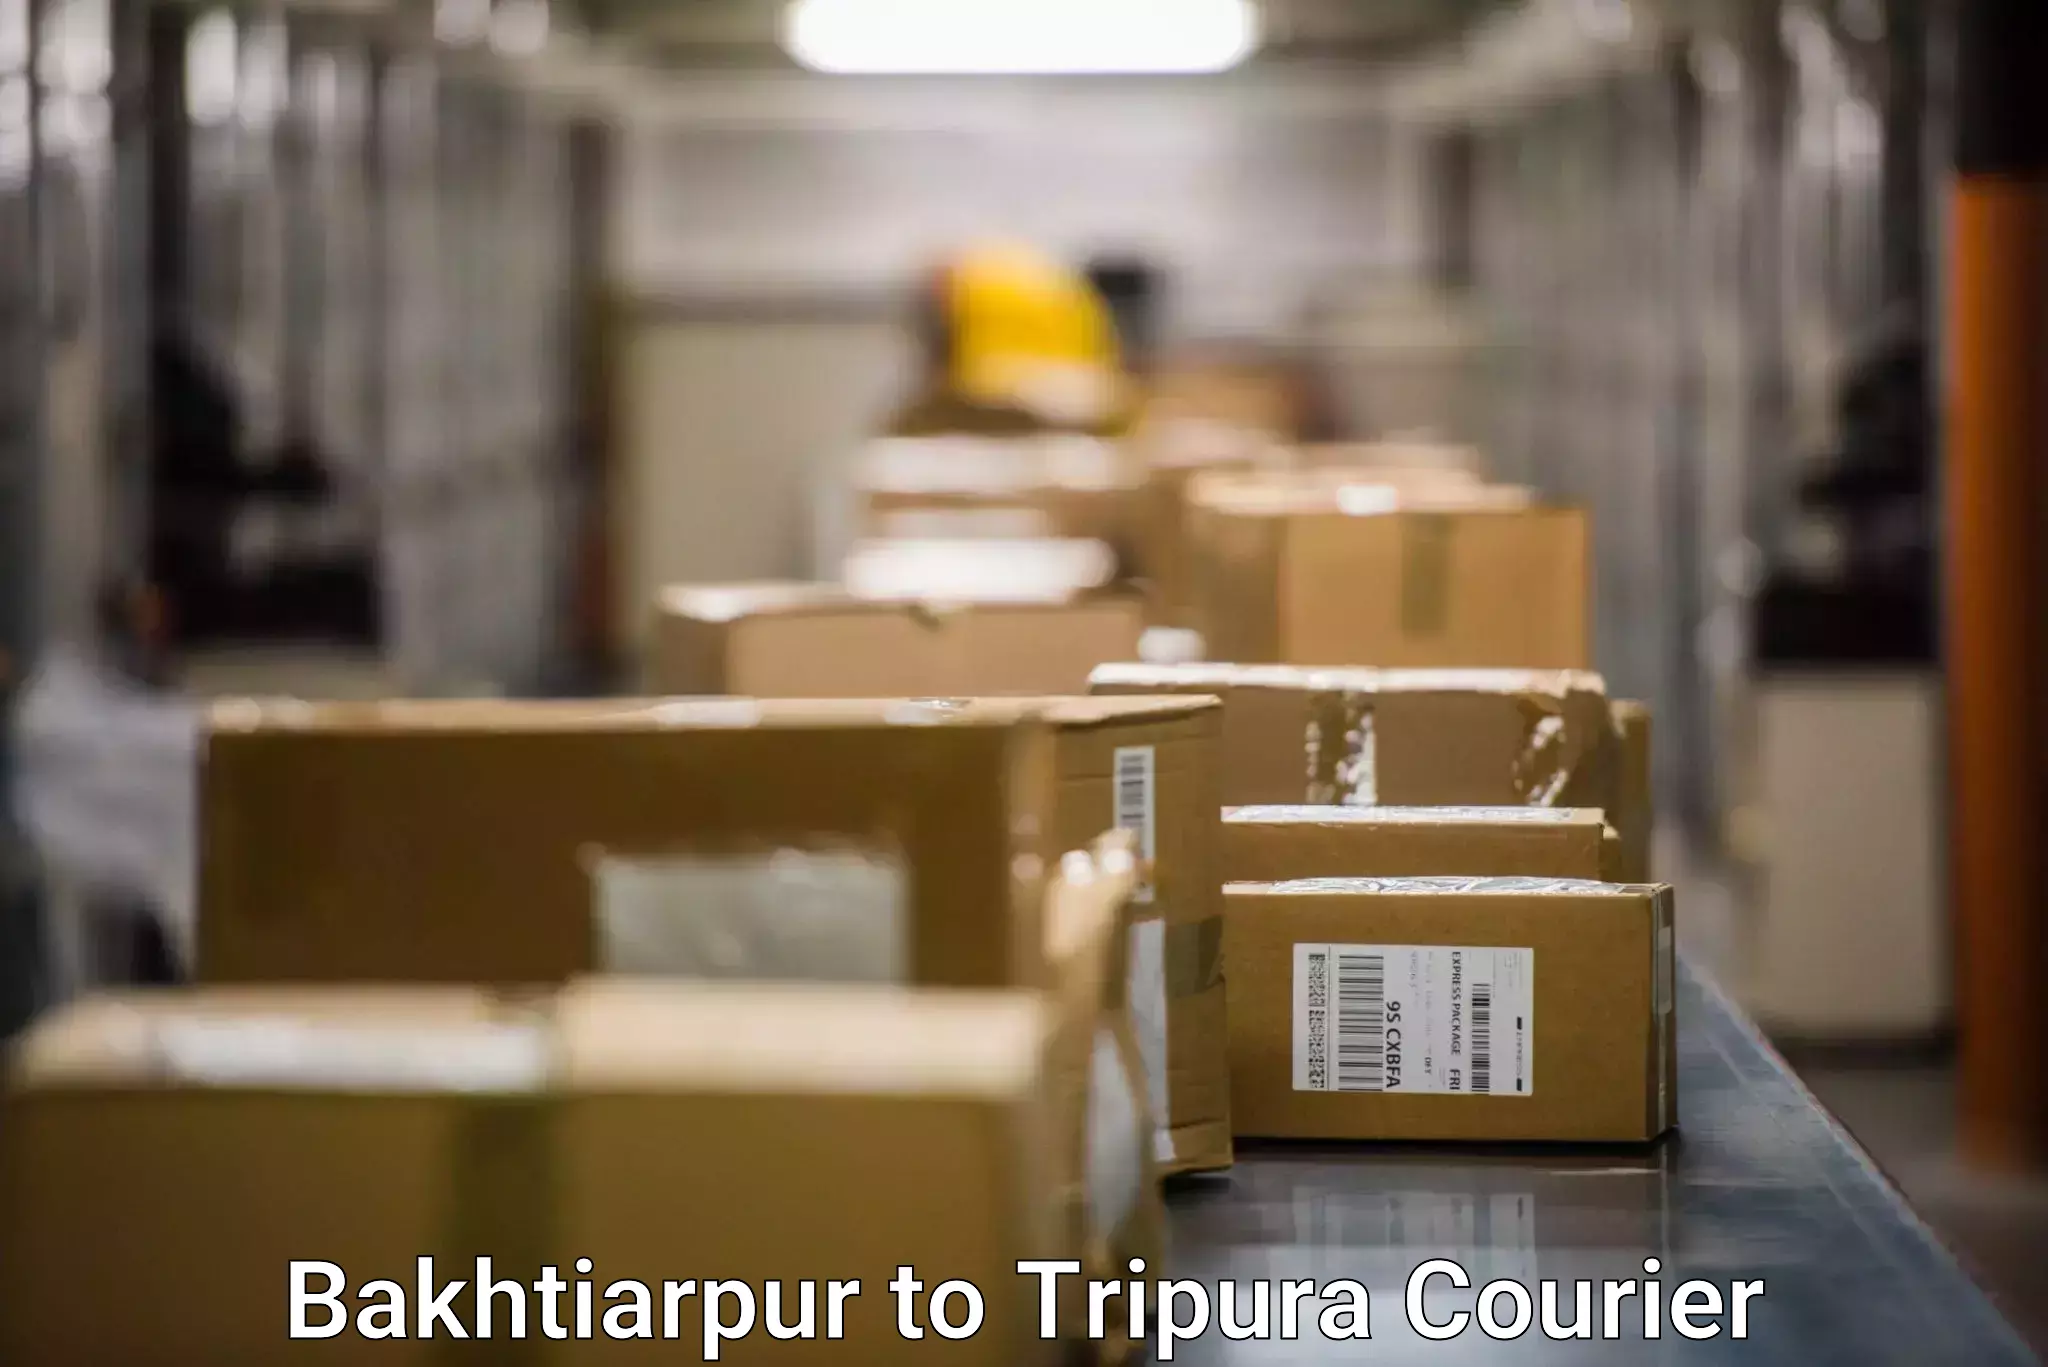 Comprehensive delivery network in Bakhtiarpur to Udaipur Tripura